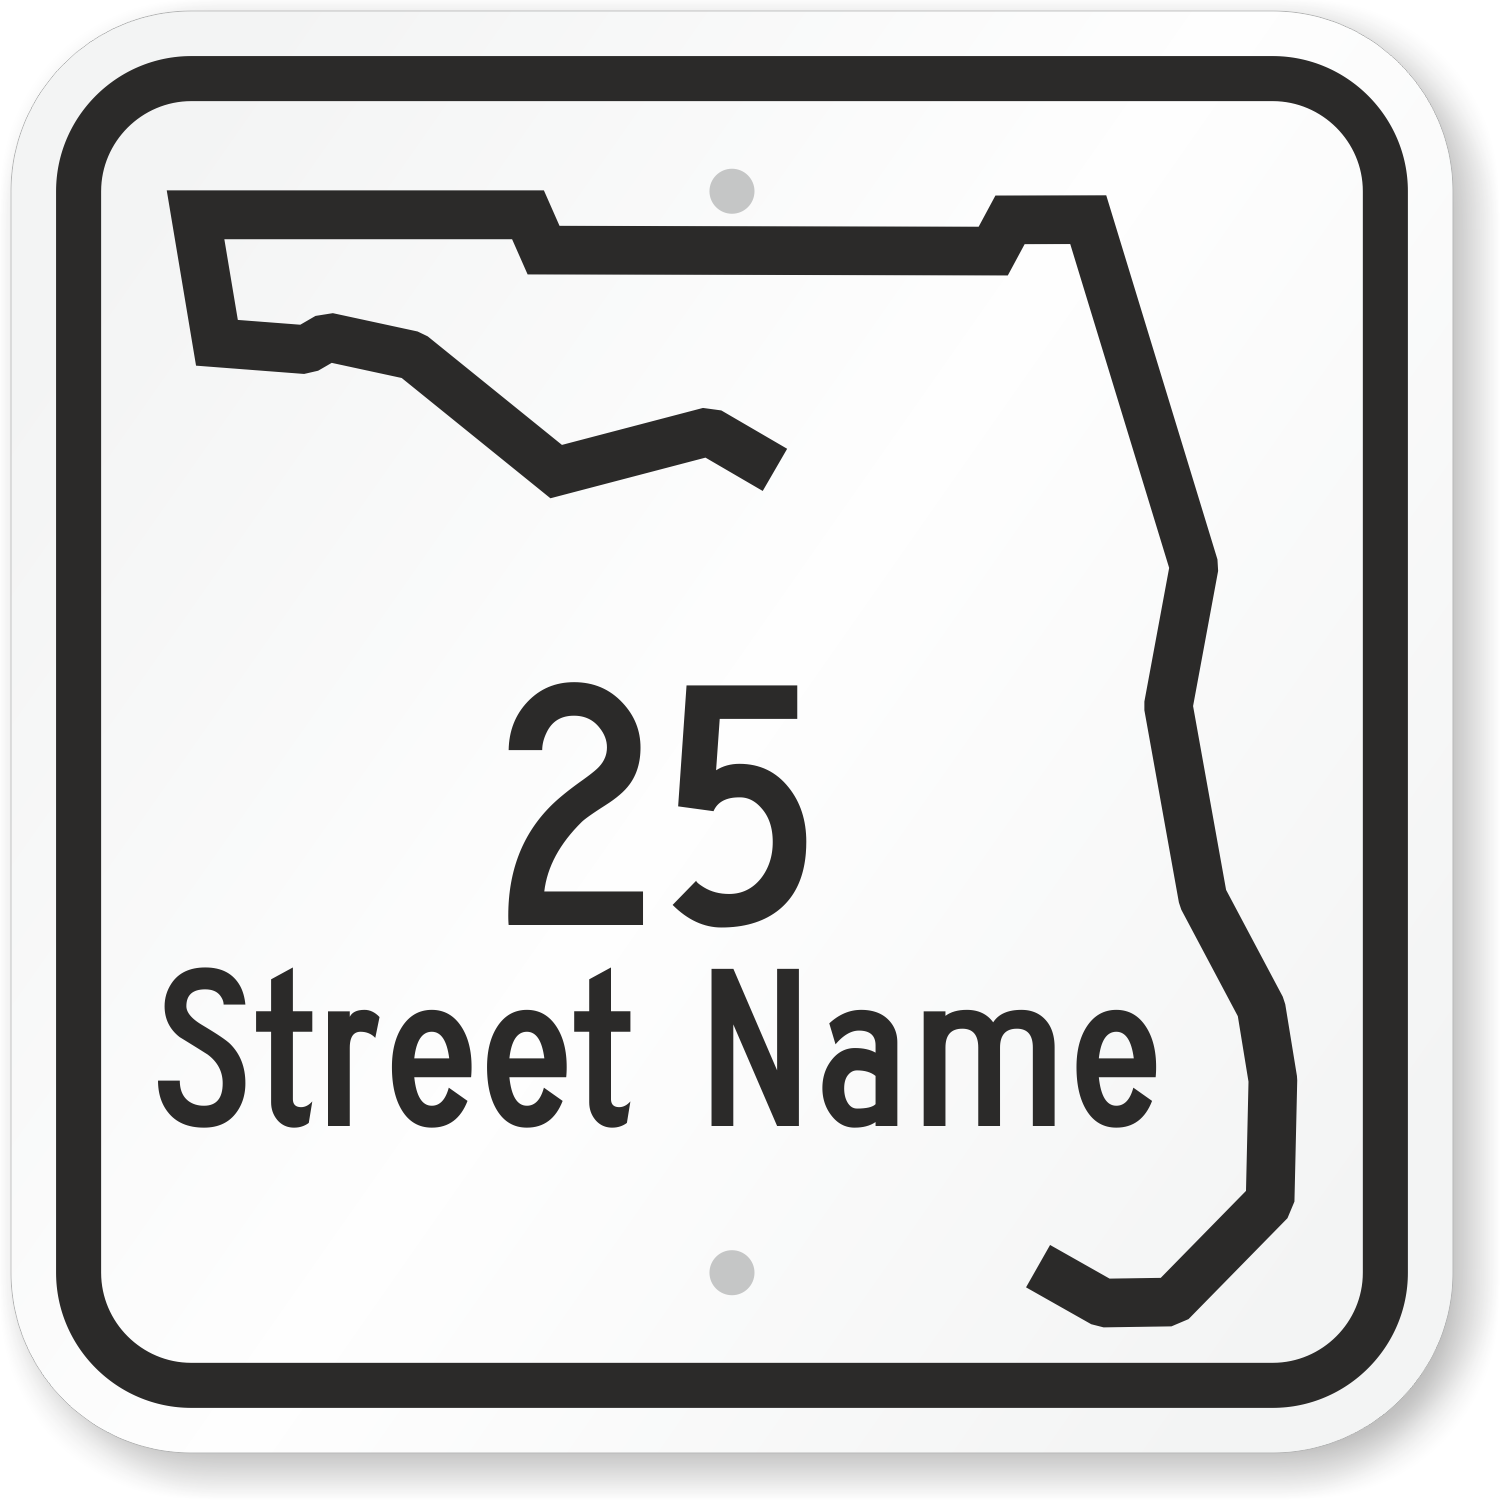 state road signs